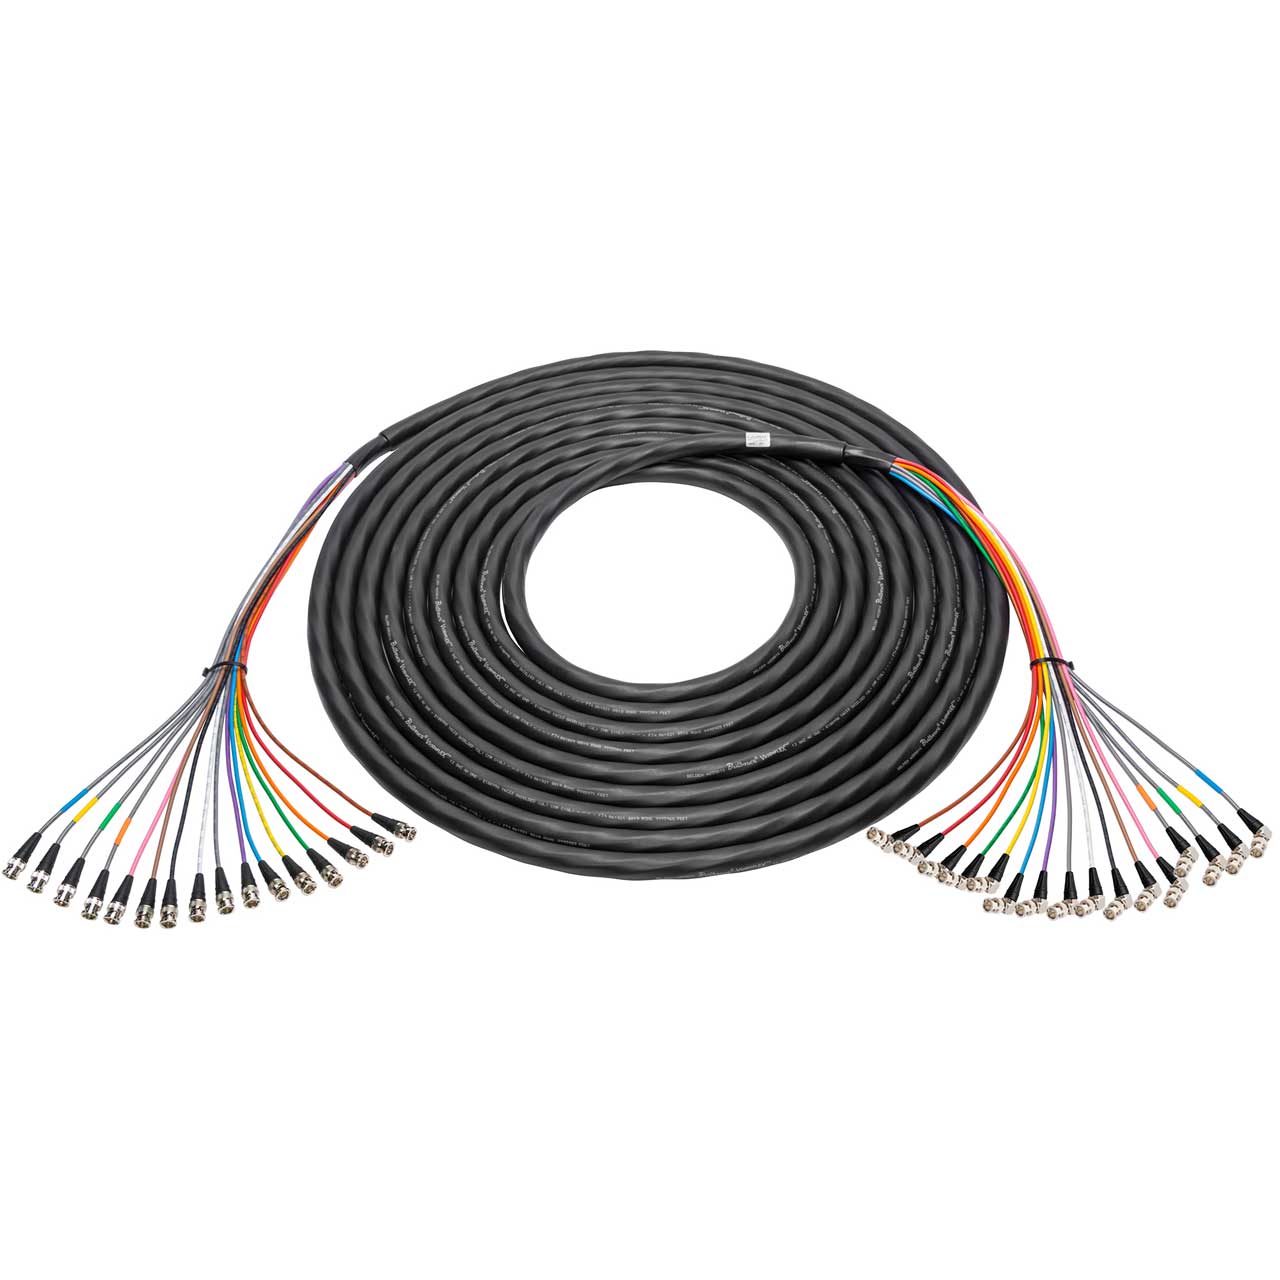 Laird 4855R16-BBA-015 16-Channel 12G-SDI/4K UHD BNC Male to Right Angle BNC Male Snake Cable - 15 Foot 4855R16-BBA-015